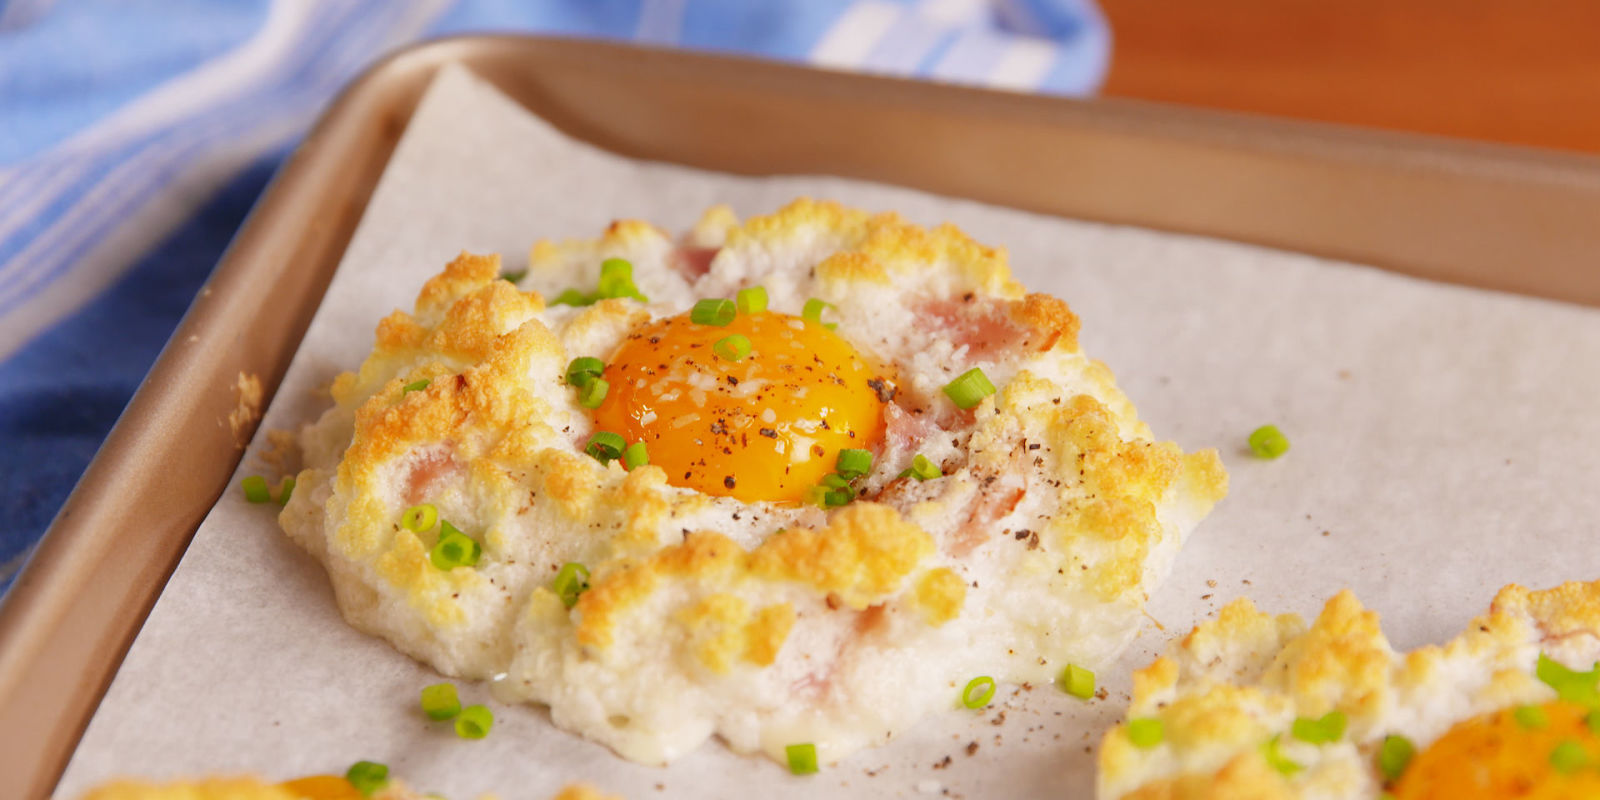 Rate These Trendy Foods and We’ll Accurately Guess Your Age Cloud eggs